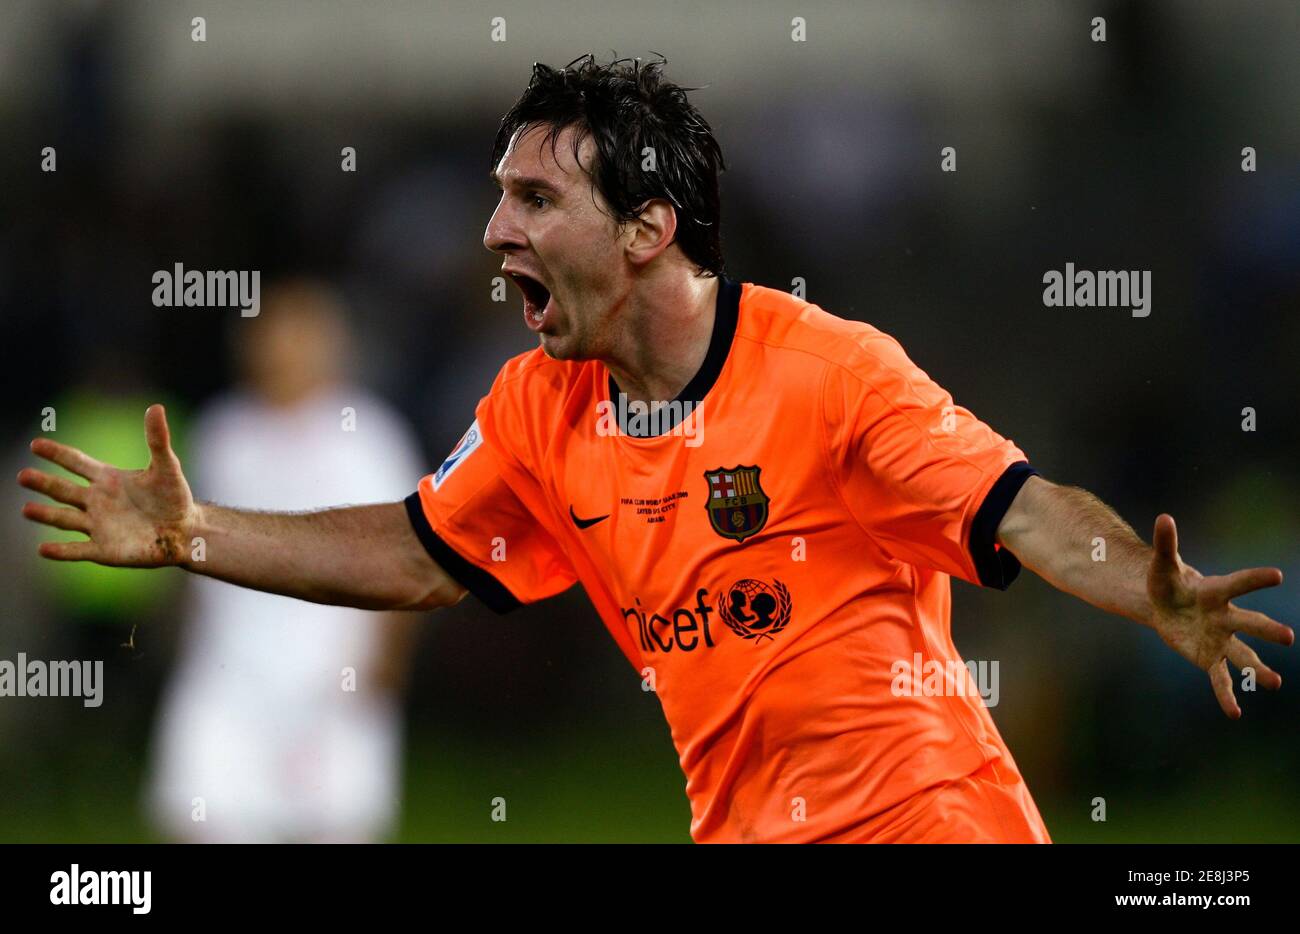 Barcelona's Lionel Messi celebrates his goal during their FIFA Club World Cup final soccer match against Estudiantes at Zayed Sports City stadium in Abu Dhabi December 19, 2009.   REUTERS/Fahad Shadeed (UNITED ARAB EMIRATES - Tags: SPORT SOCCER) Stock Photo